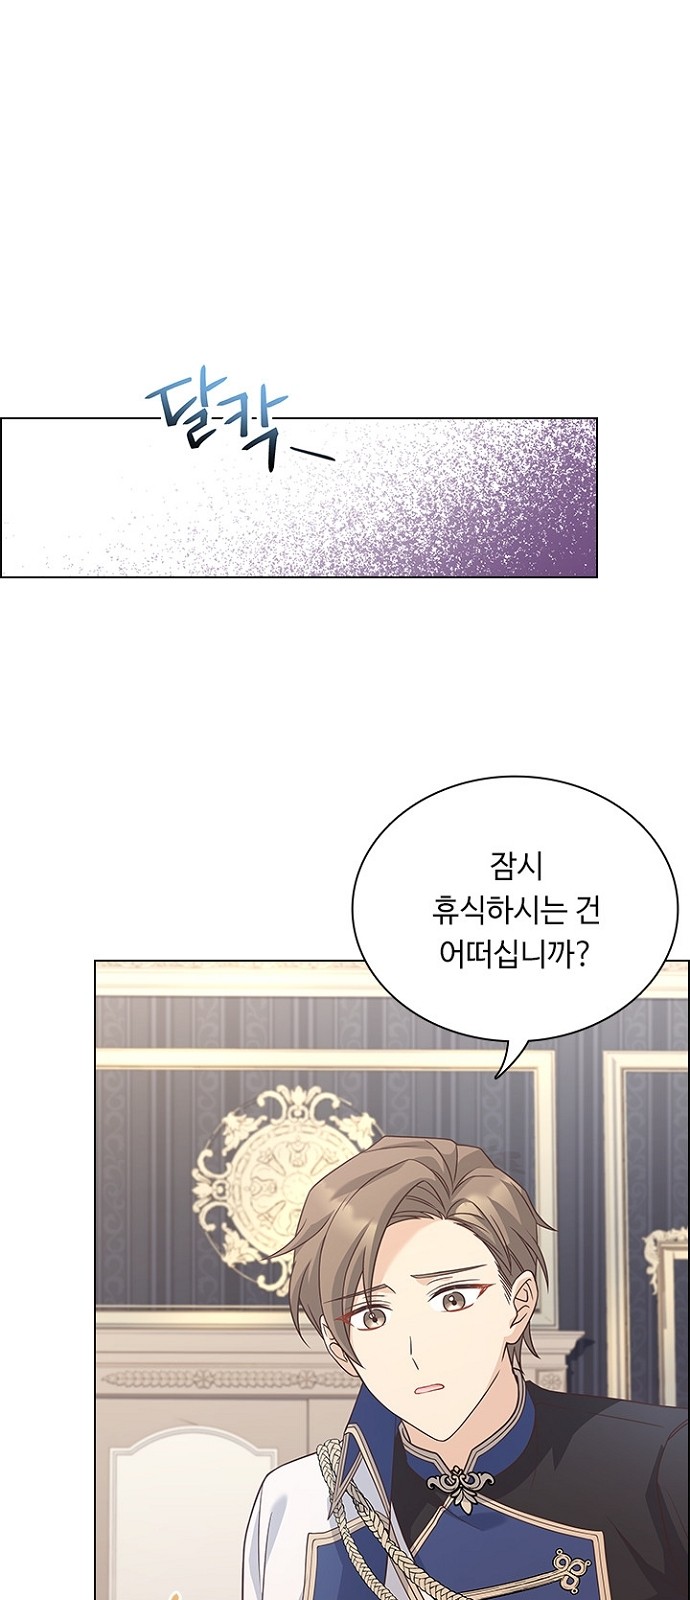 His Majesty's Proposal (A Night With the Emperor) - Chapter 87 - Page 2